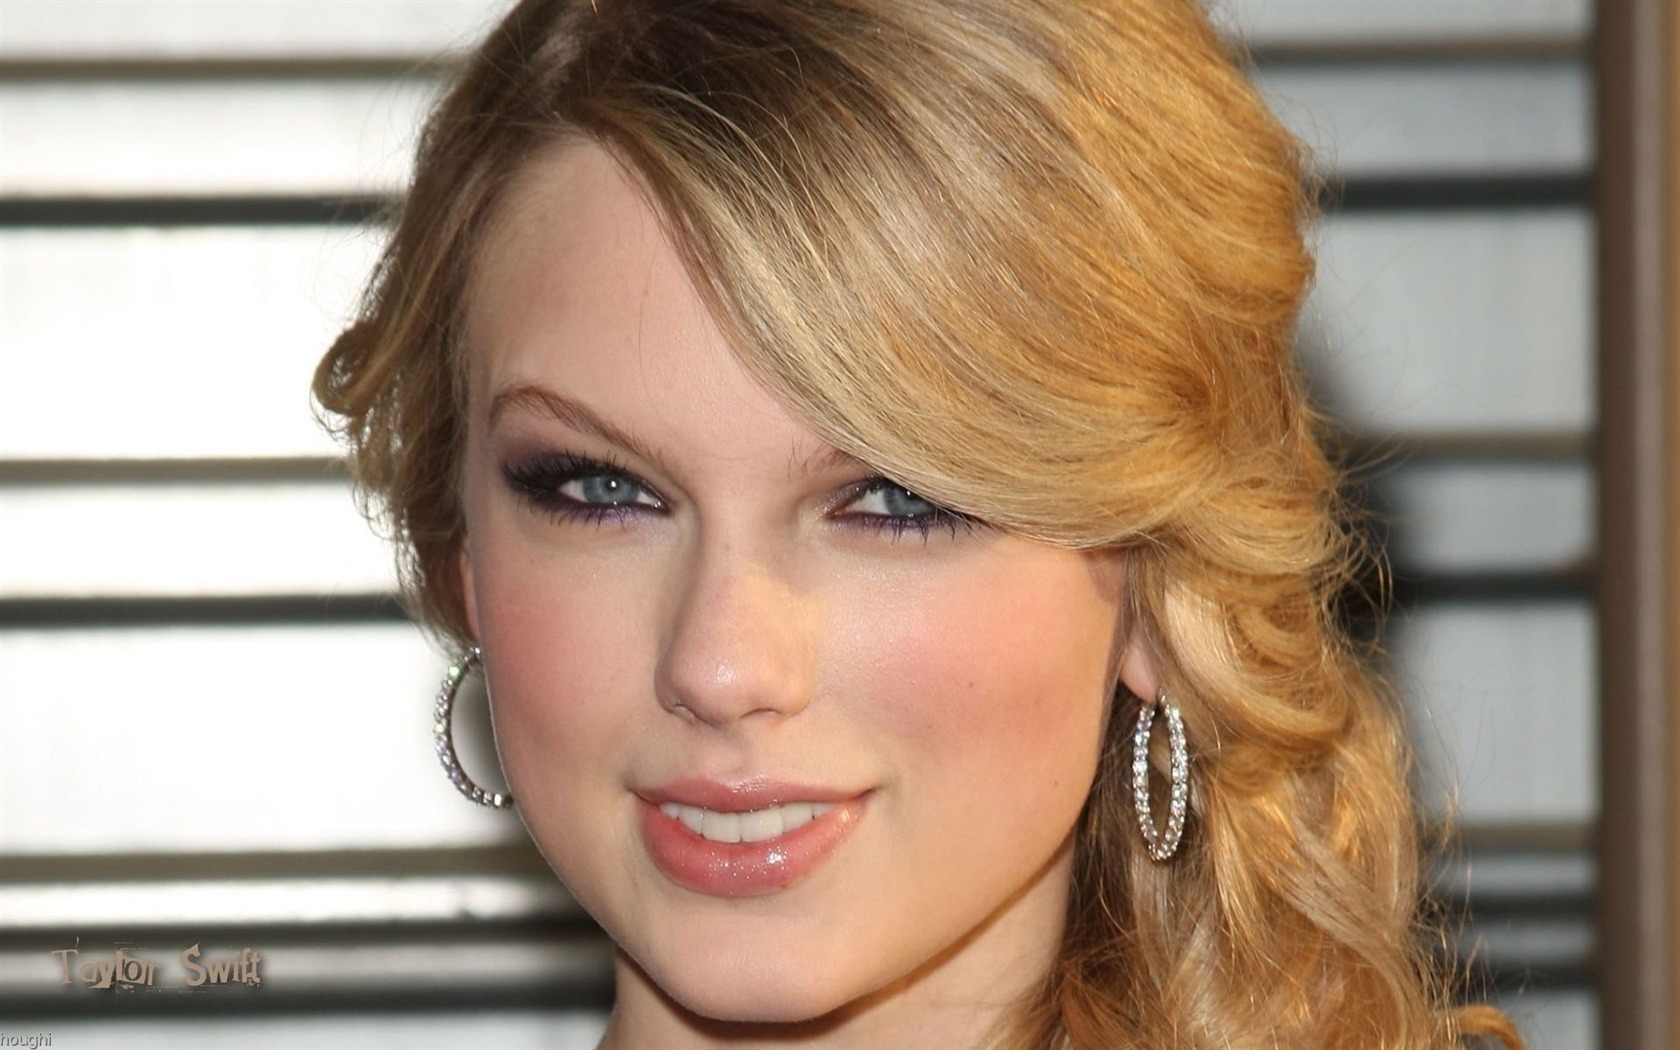 Taylor Swift #058 - 1680x1050 Wallpapers Pictures Photos Images